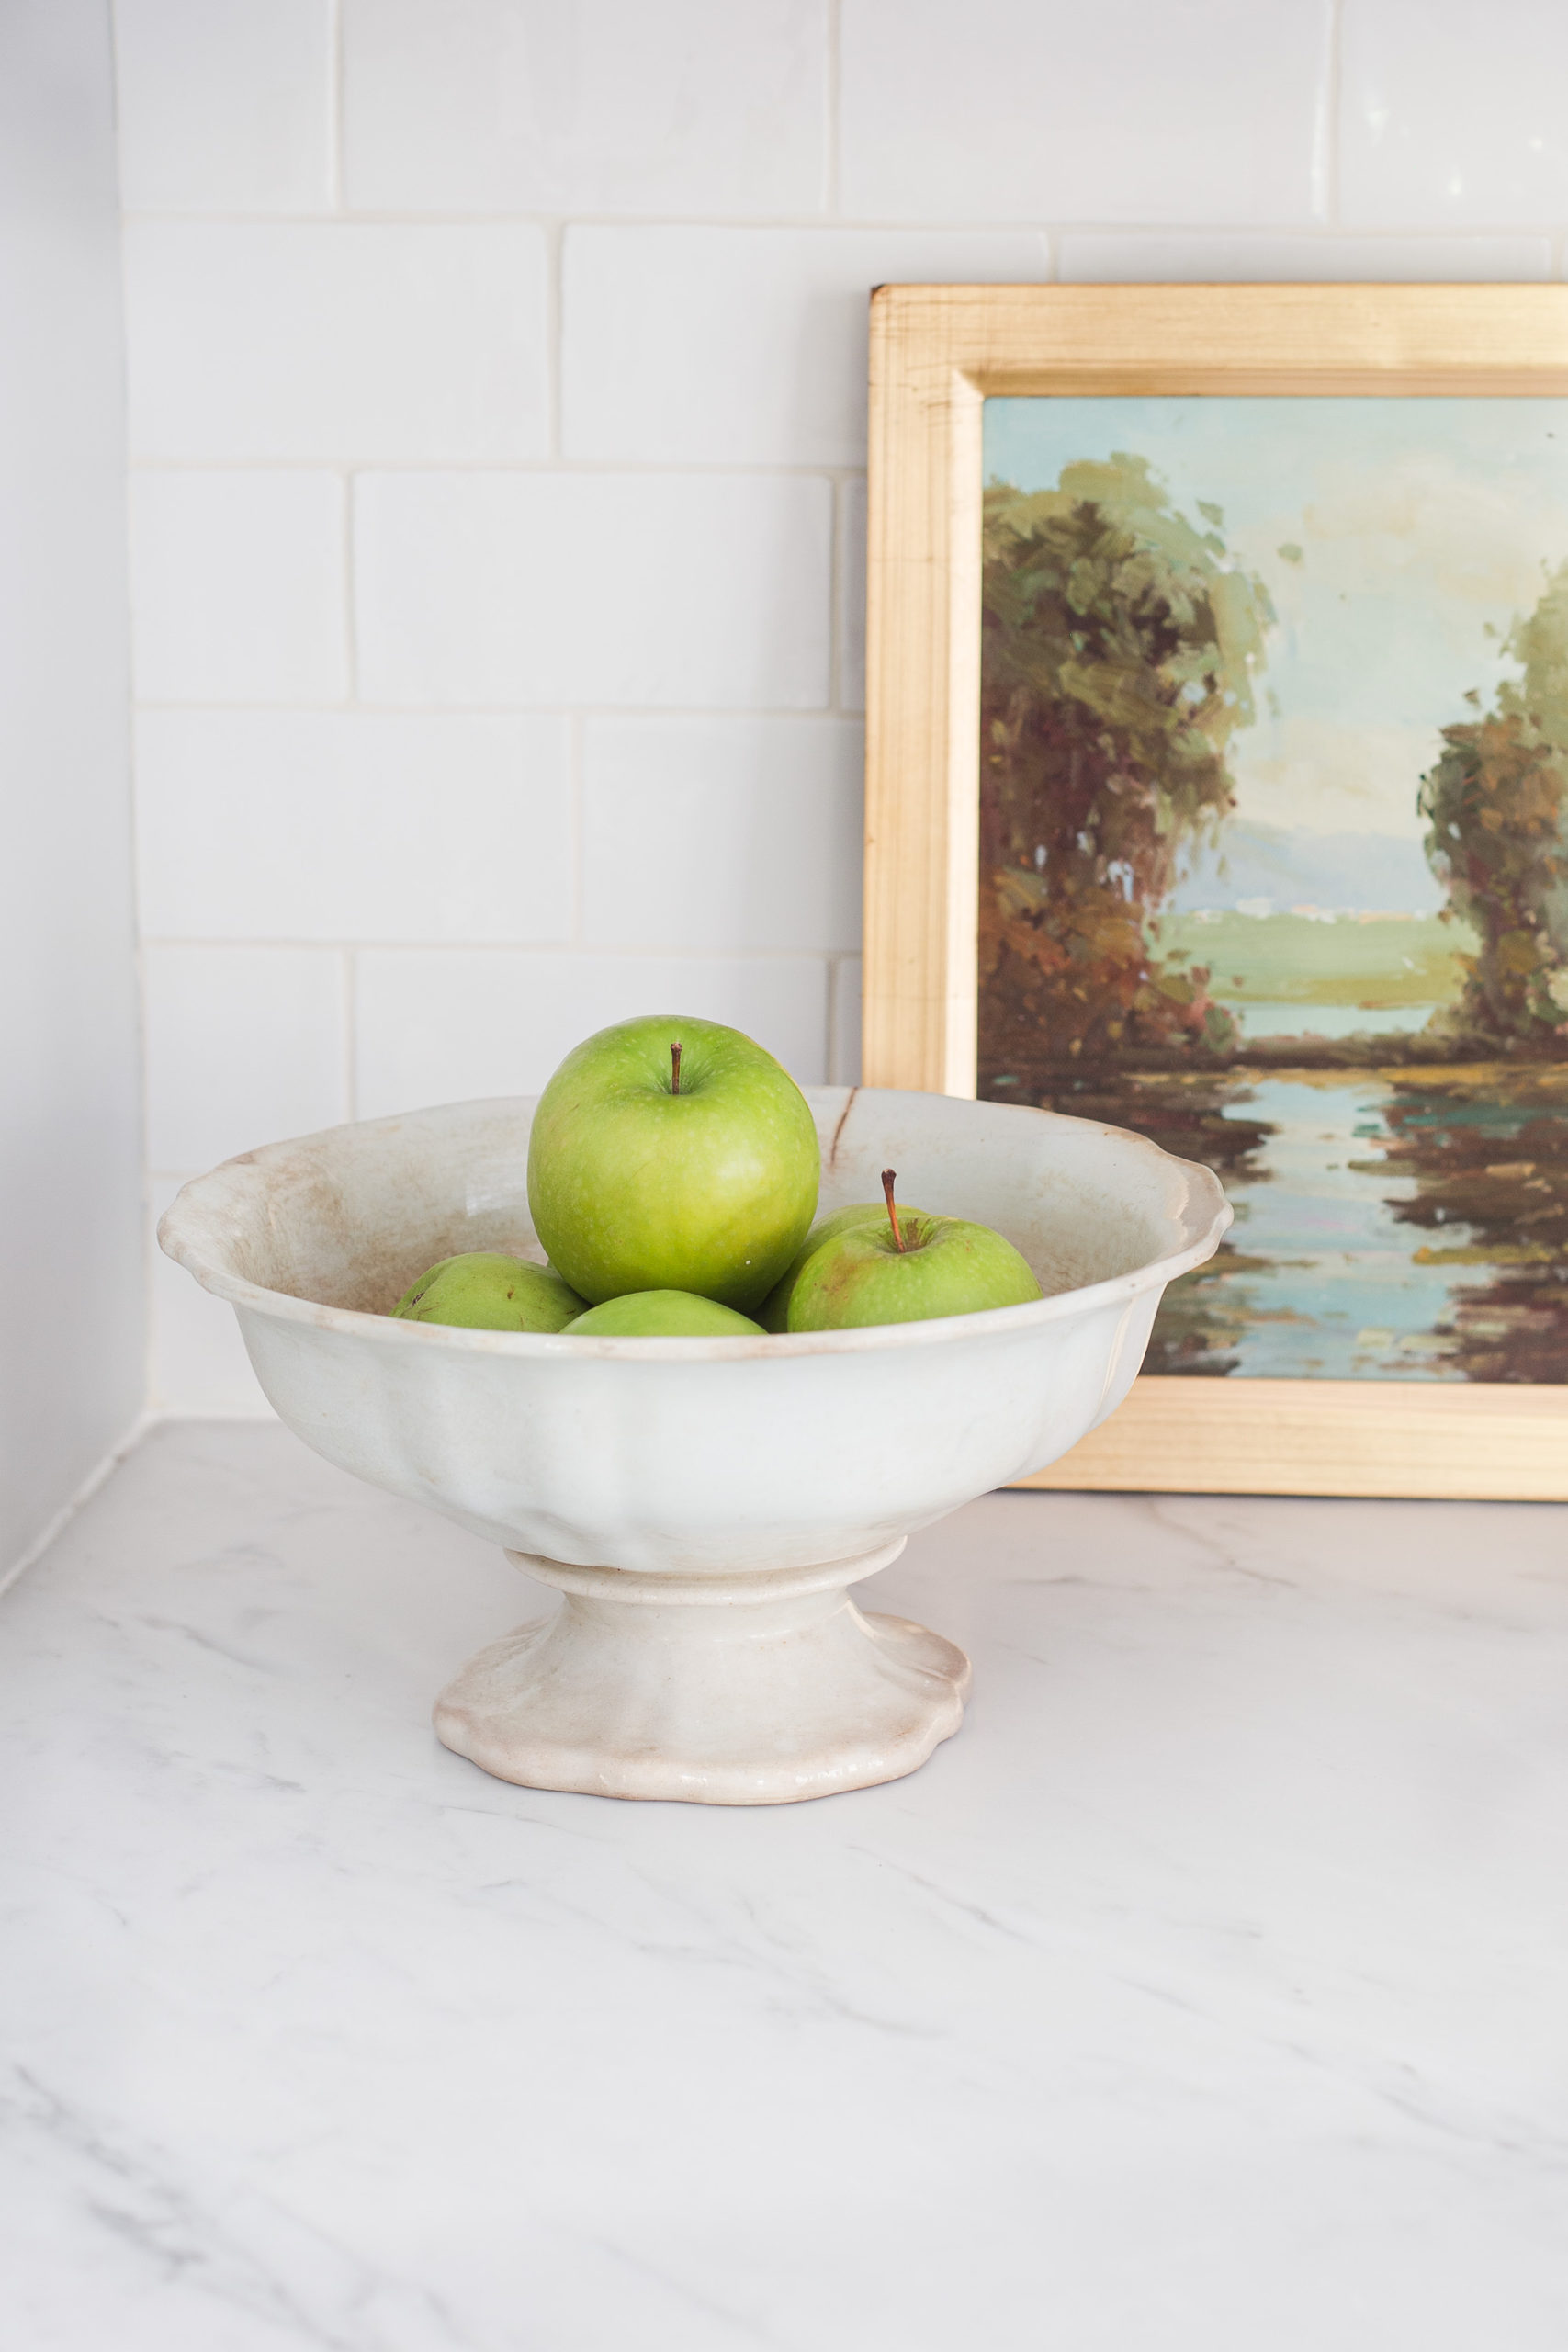 compote of green apples sitting on counter with oil painting in background